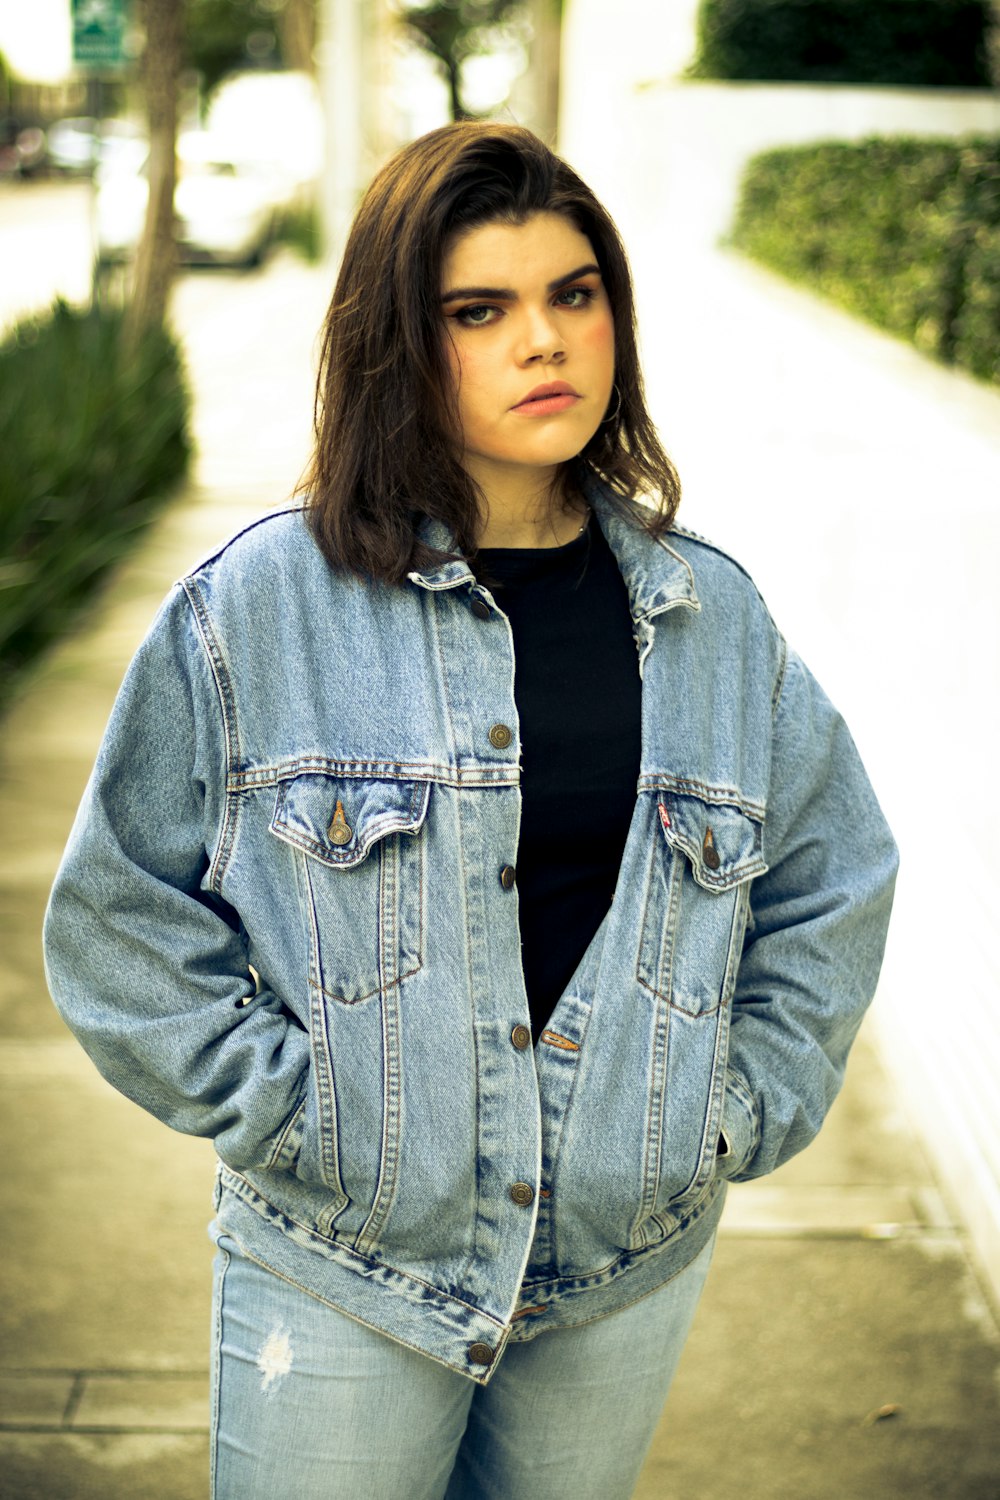 woman in blue denim jacket standing on road during daytime